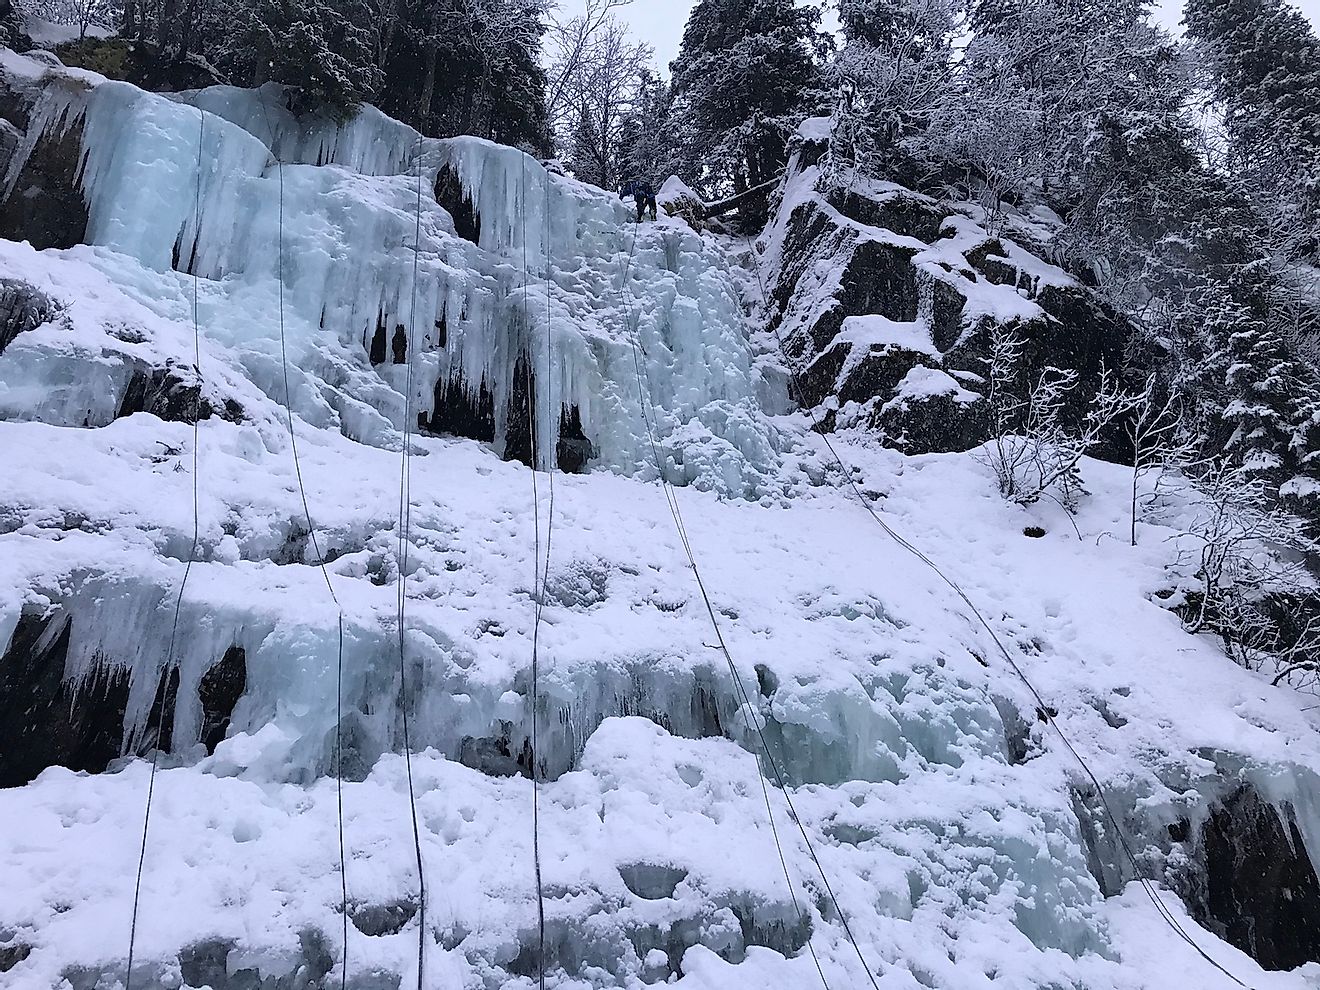 Ice climbng in Norway Rjukan. Image credit: Workerlv/Shutterstock.com